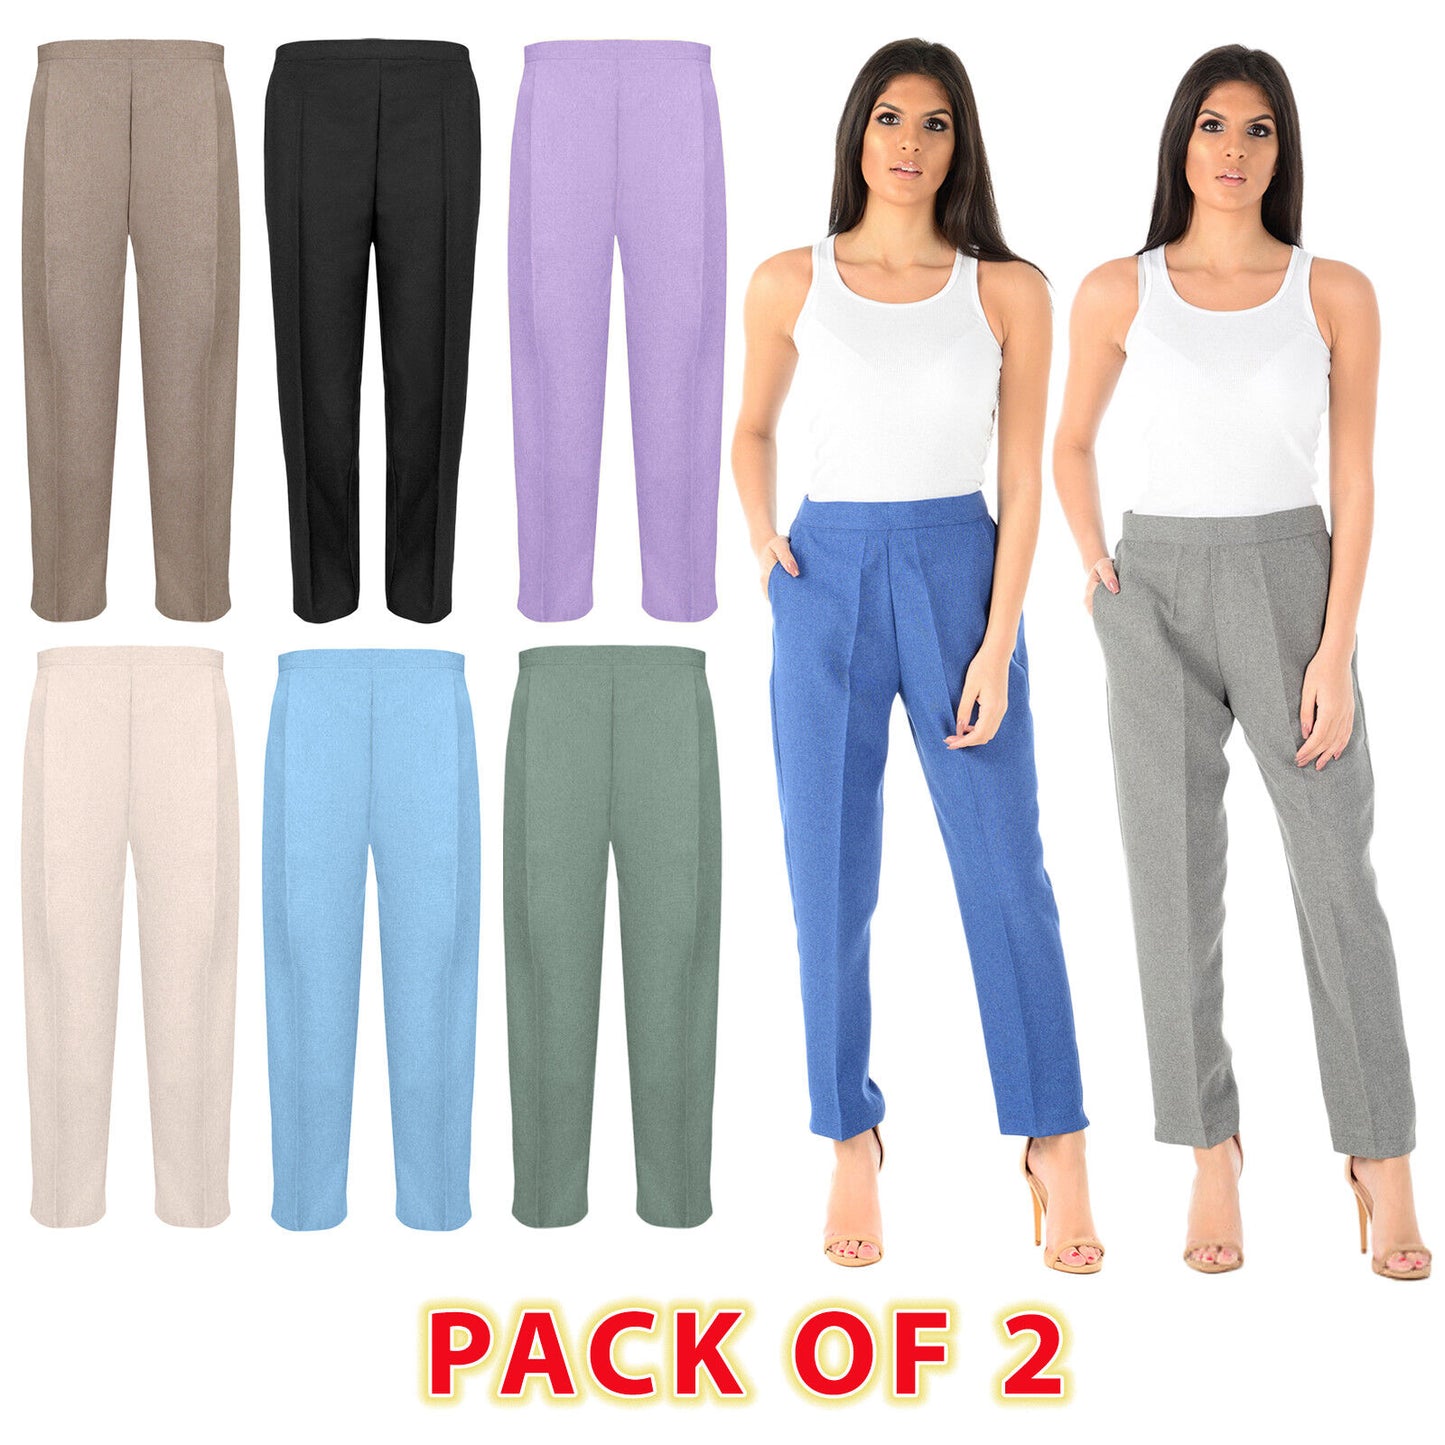 PACK OF 2 LADIES WOMENS HALF ELASTICATED WAIST TROUSERS WITH POCKETS PLUS SIZE 10 to 14